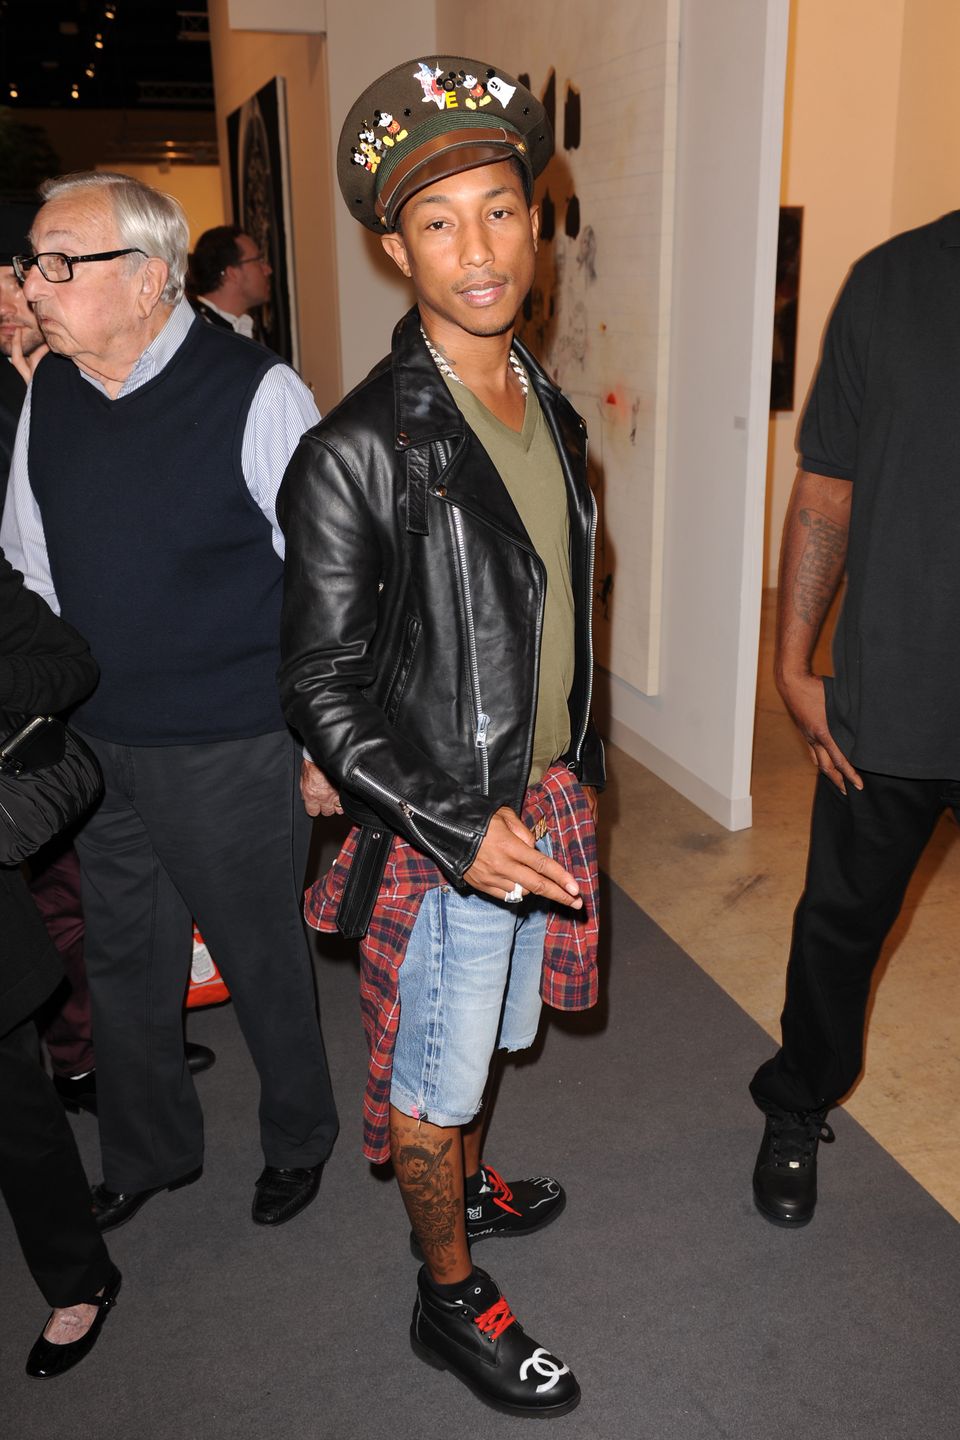 Fashion Is a Way”—How Pharrell Williams's Philosophy Could Make